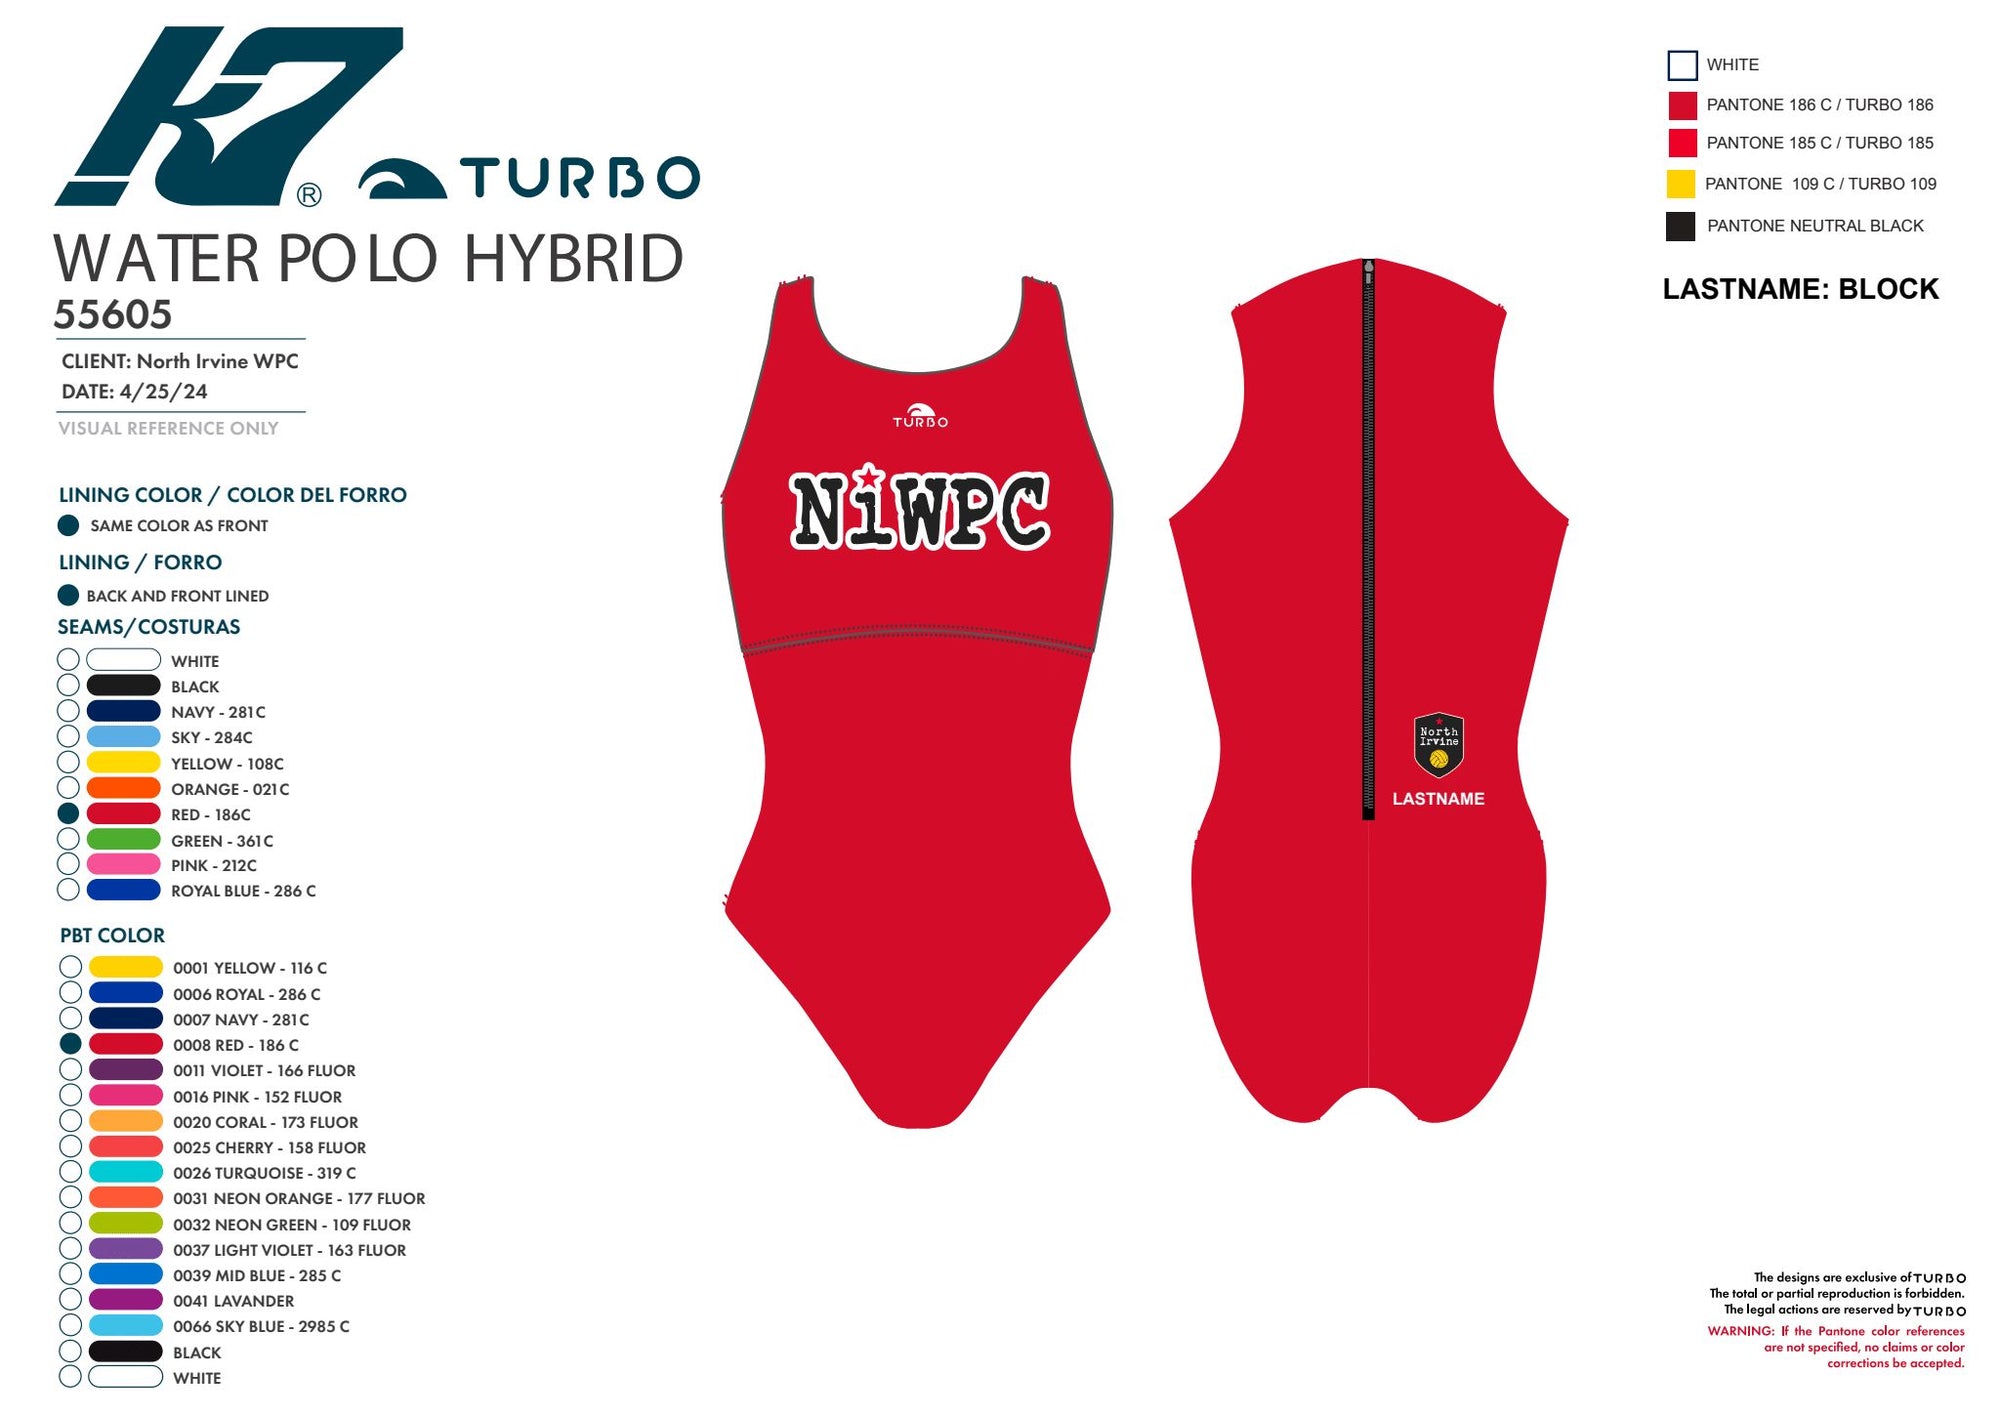 North Irvine WPC Team Store - North Irvine Water Polo Club Comfort Hybrid Suit. - RED